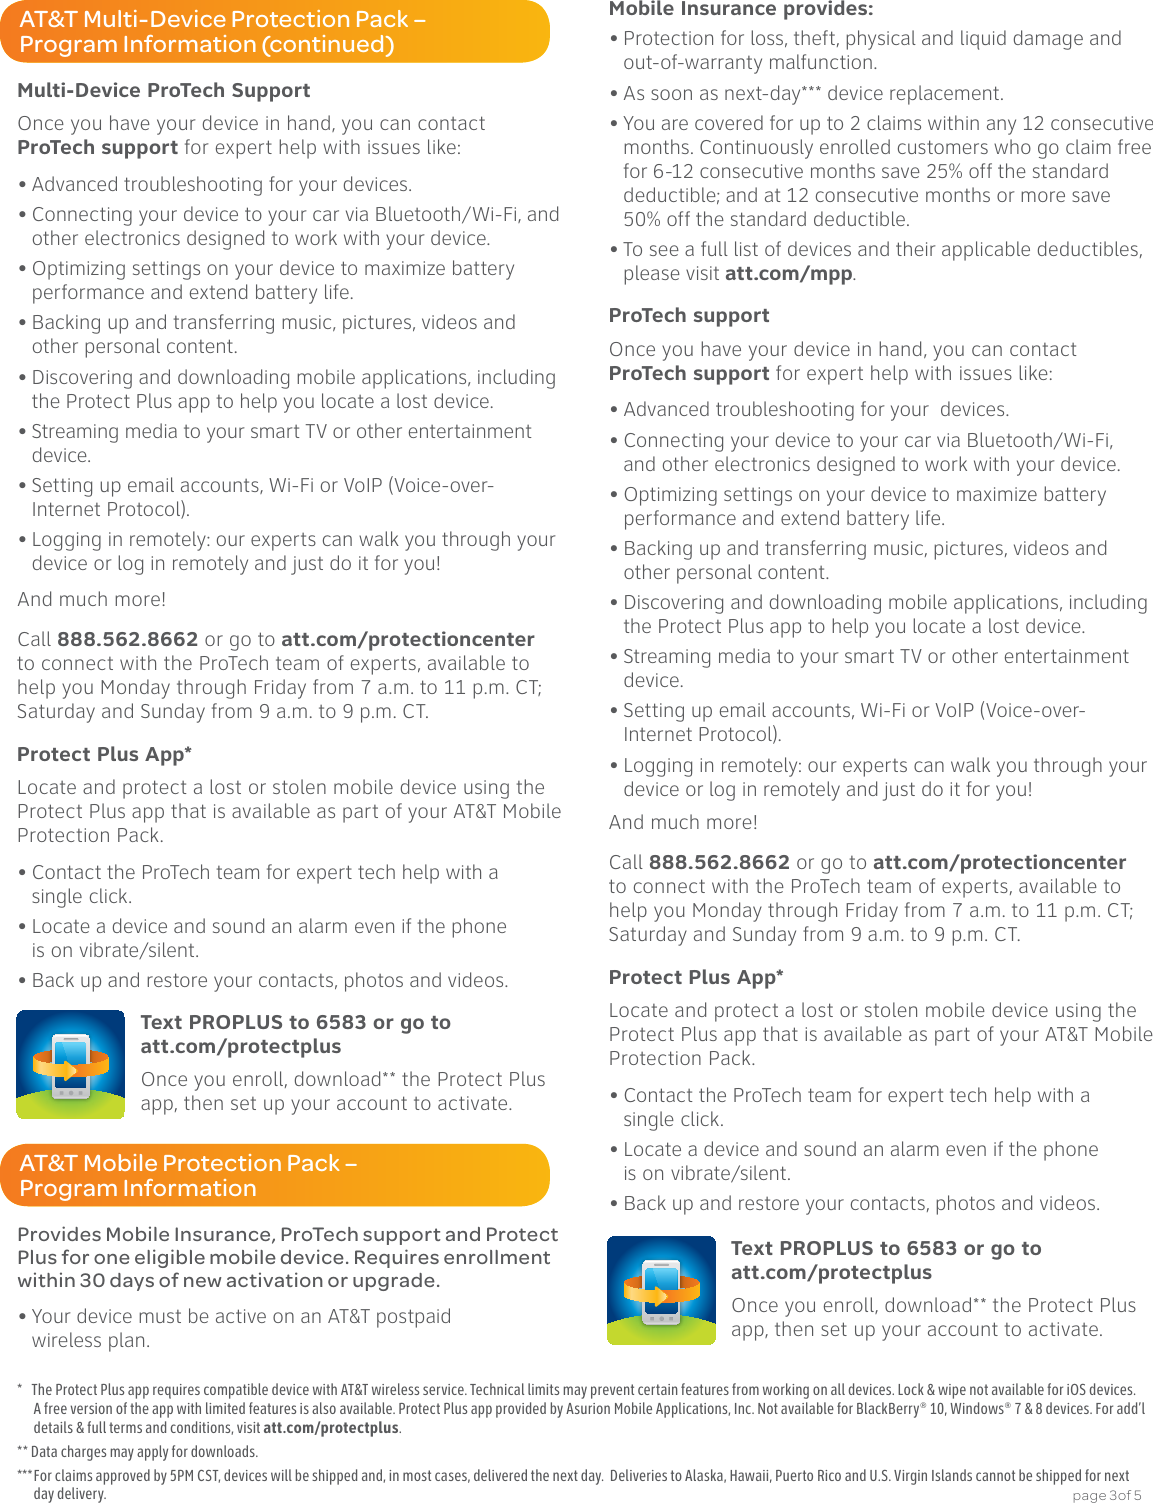 Page 3 of 5 - ATT Mobile Protection Pack